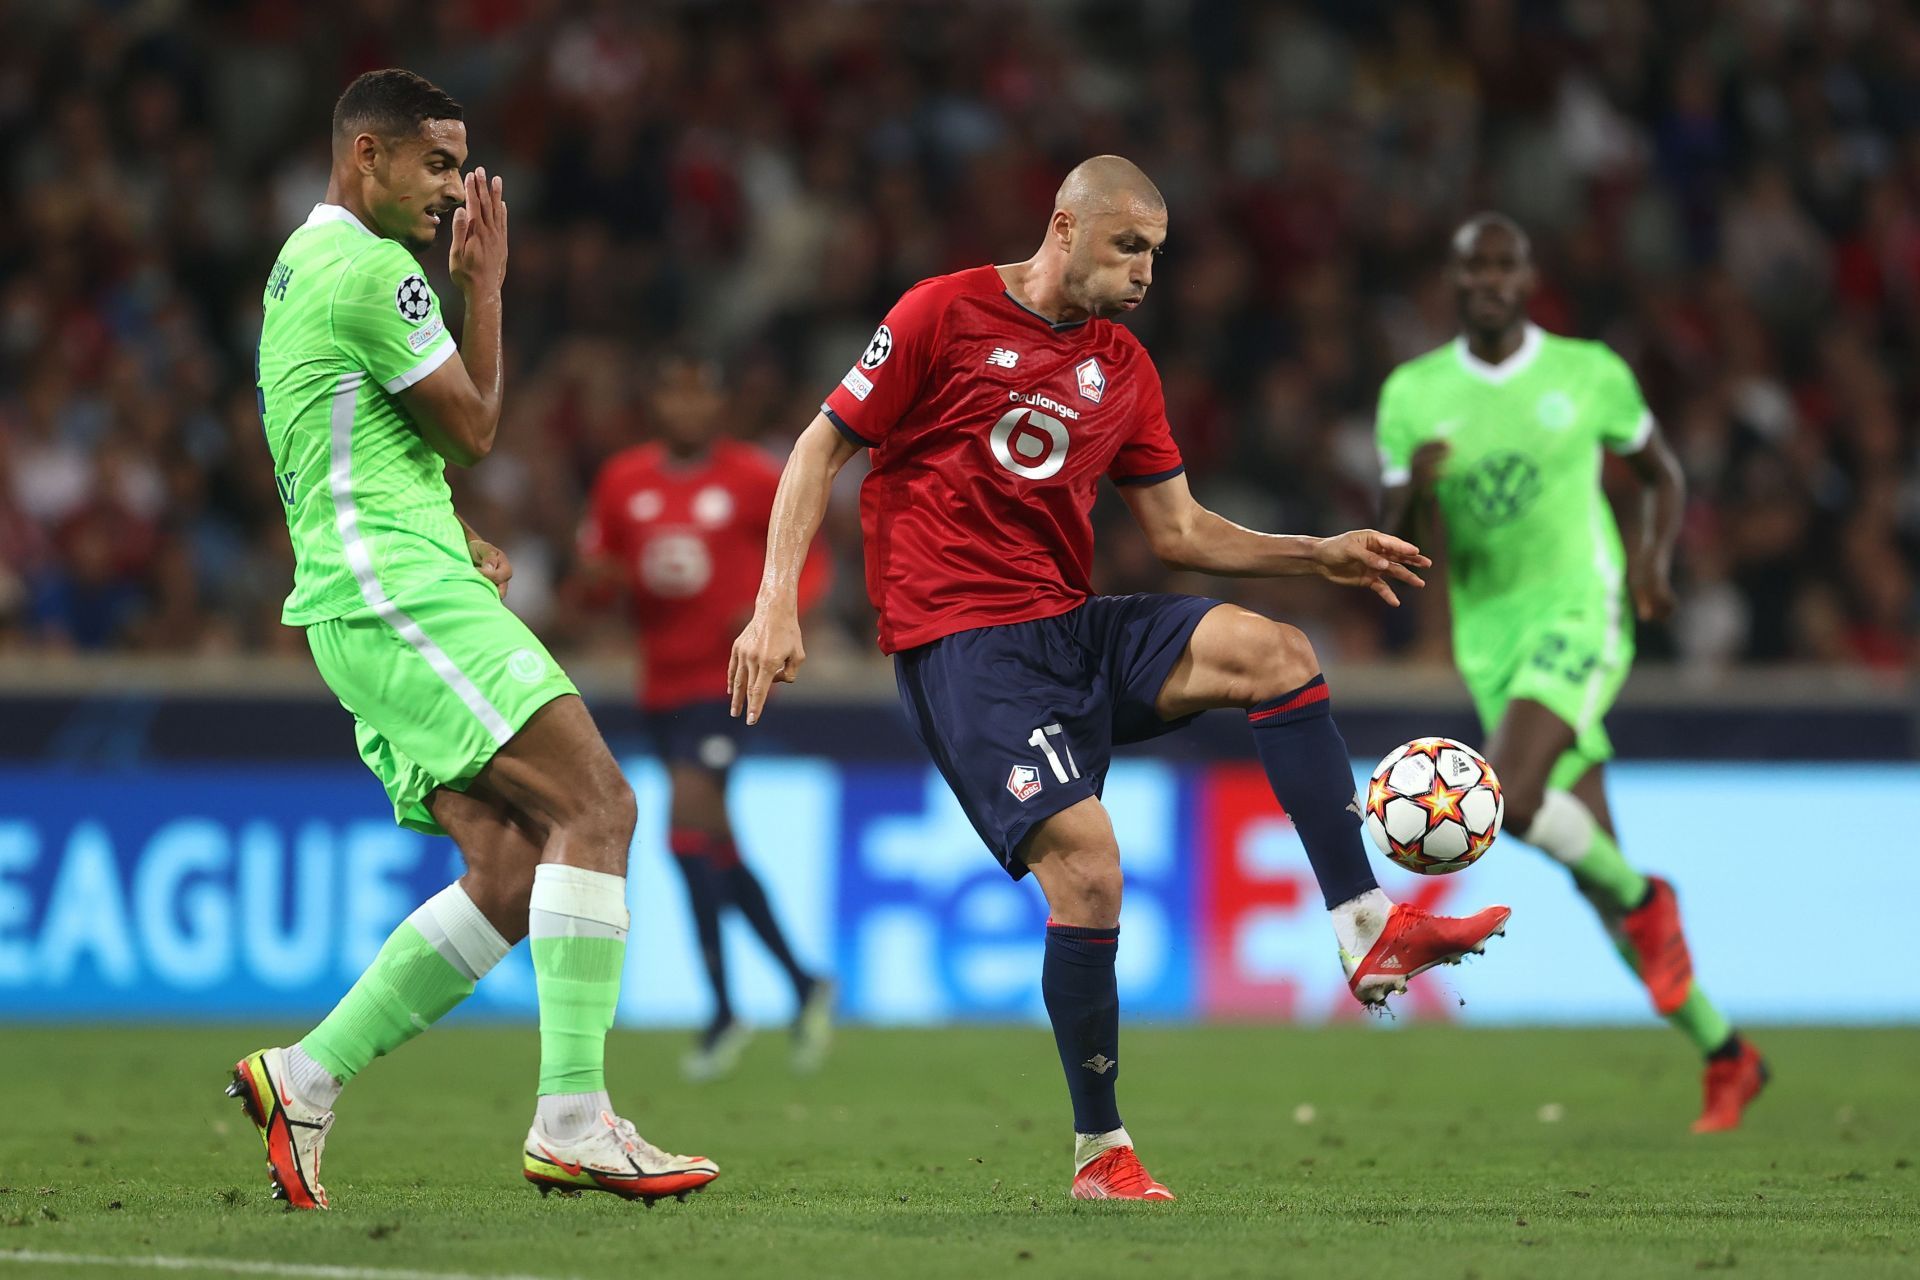 Wolfsburg face Lille in their upcoming UEFA Champions League fixture on Wednesday